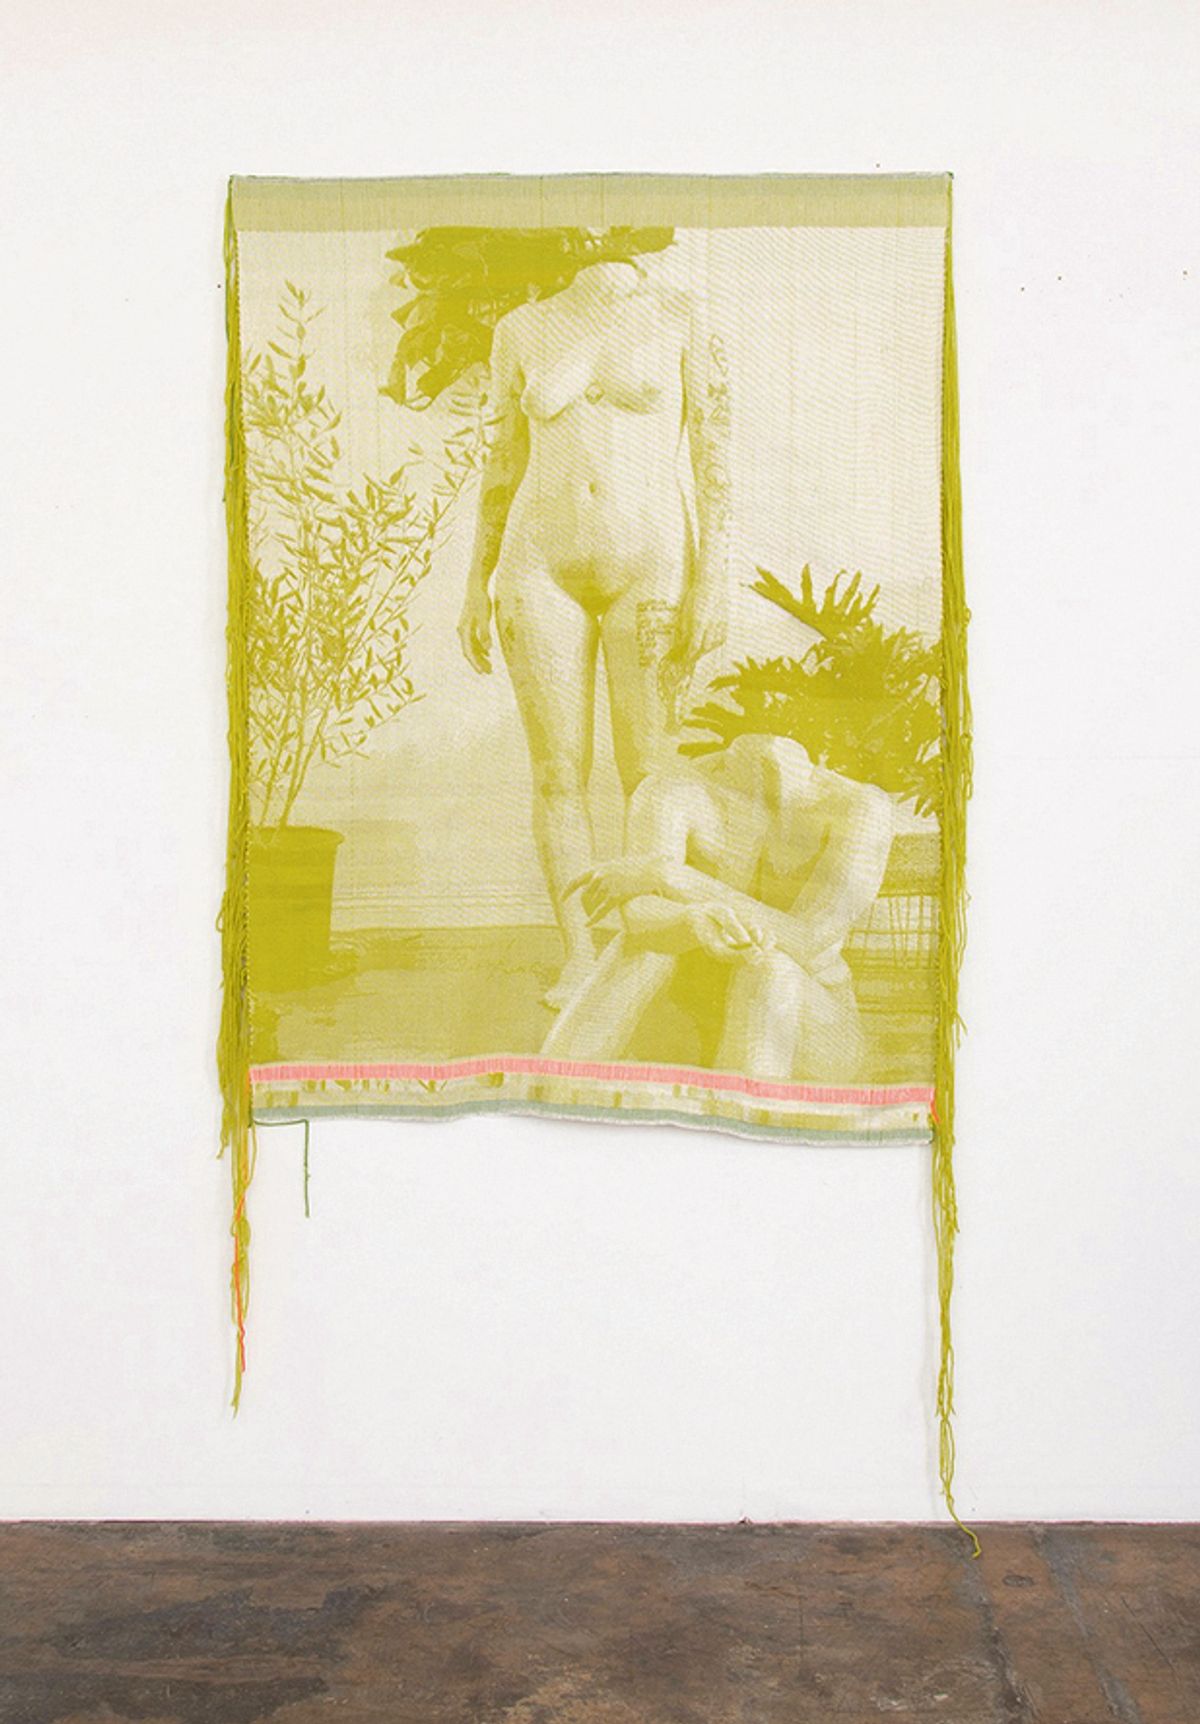 Mia Weiner’s Caryatid (2022) is at Mama Projects’ stand at Future Fair

Courtesy Mama Projects